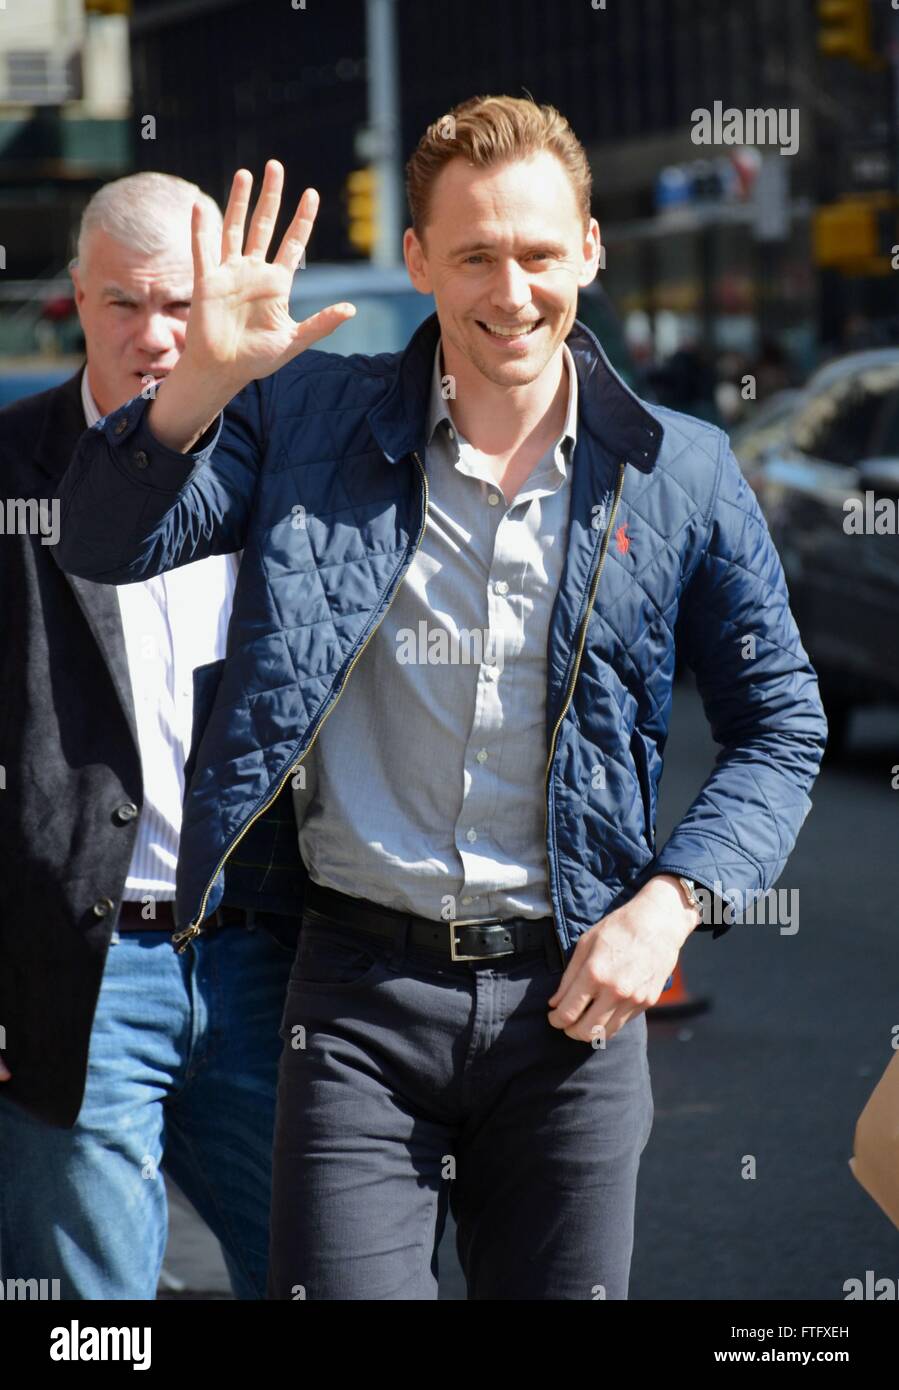 New York, NY, USA. 28th Mar, 2016. Tom Hiddleston out and about for Celebrity Candids - MON, New York, NY March 28, 2016. Credit:  Derek Storm/Everett Collection/Alamy Live News Stock Photo